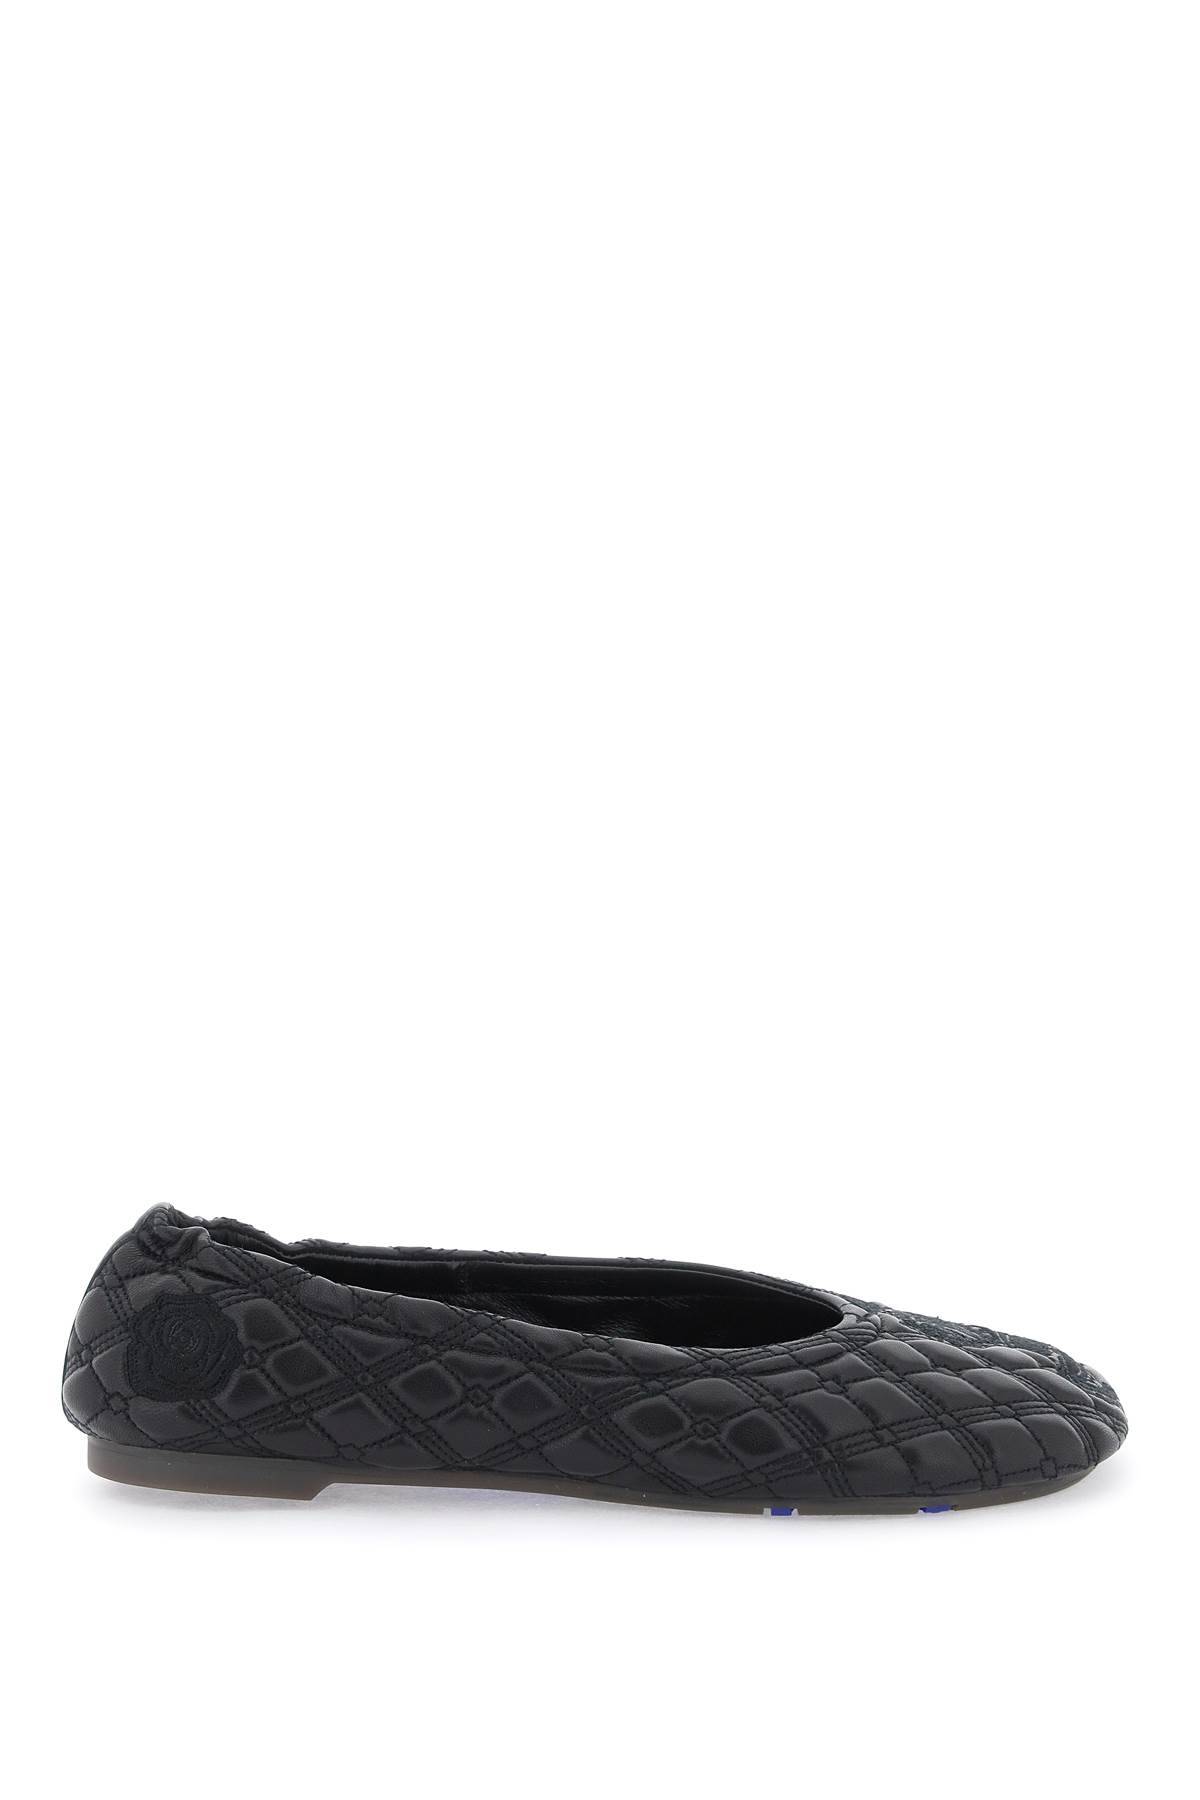 BURBERRY quilted leather sadler ballet flats